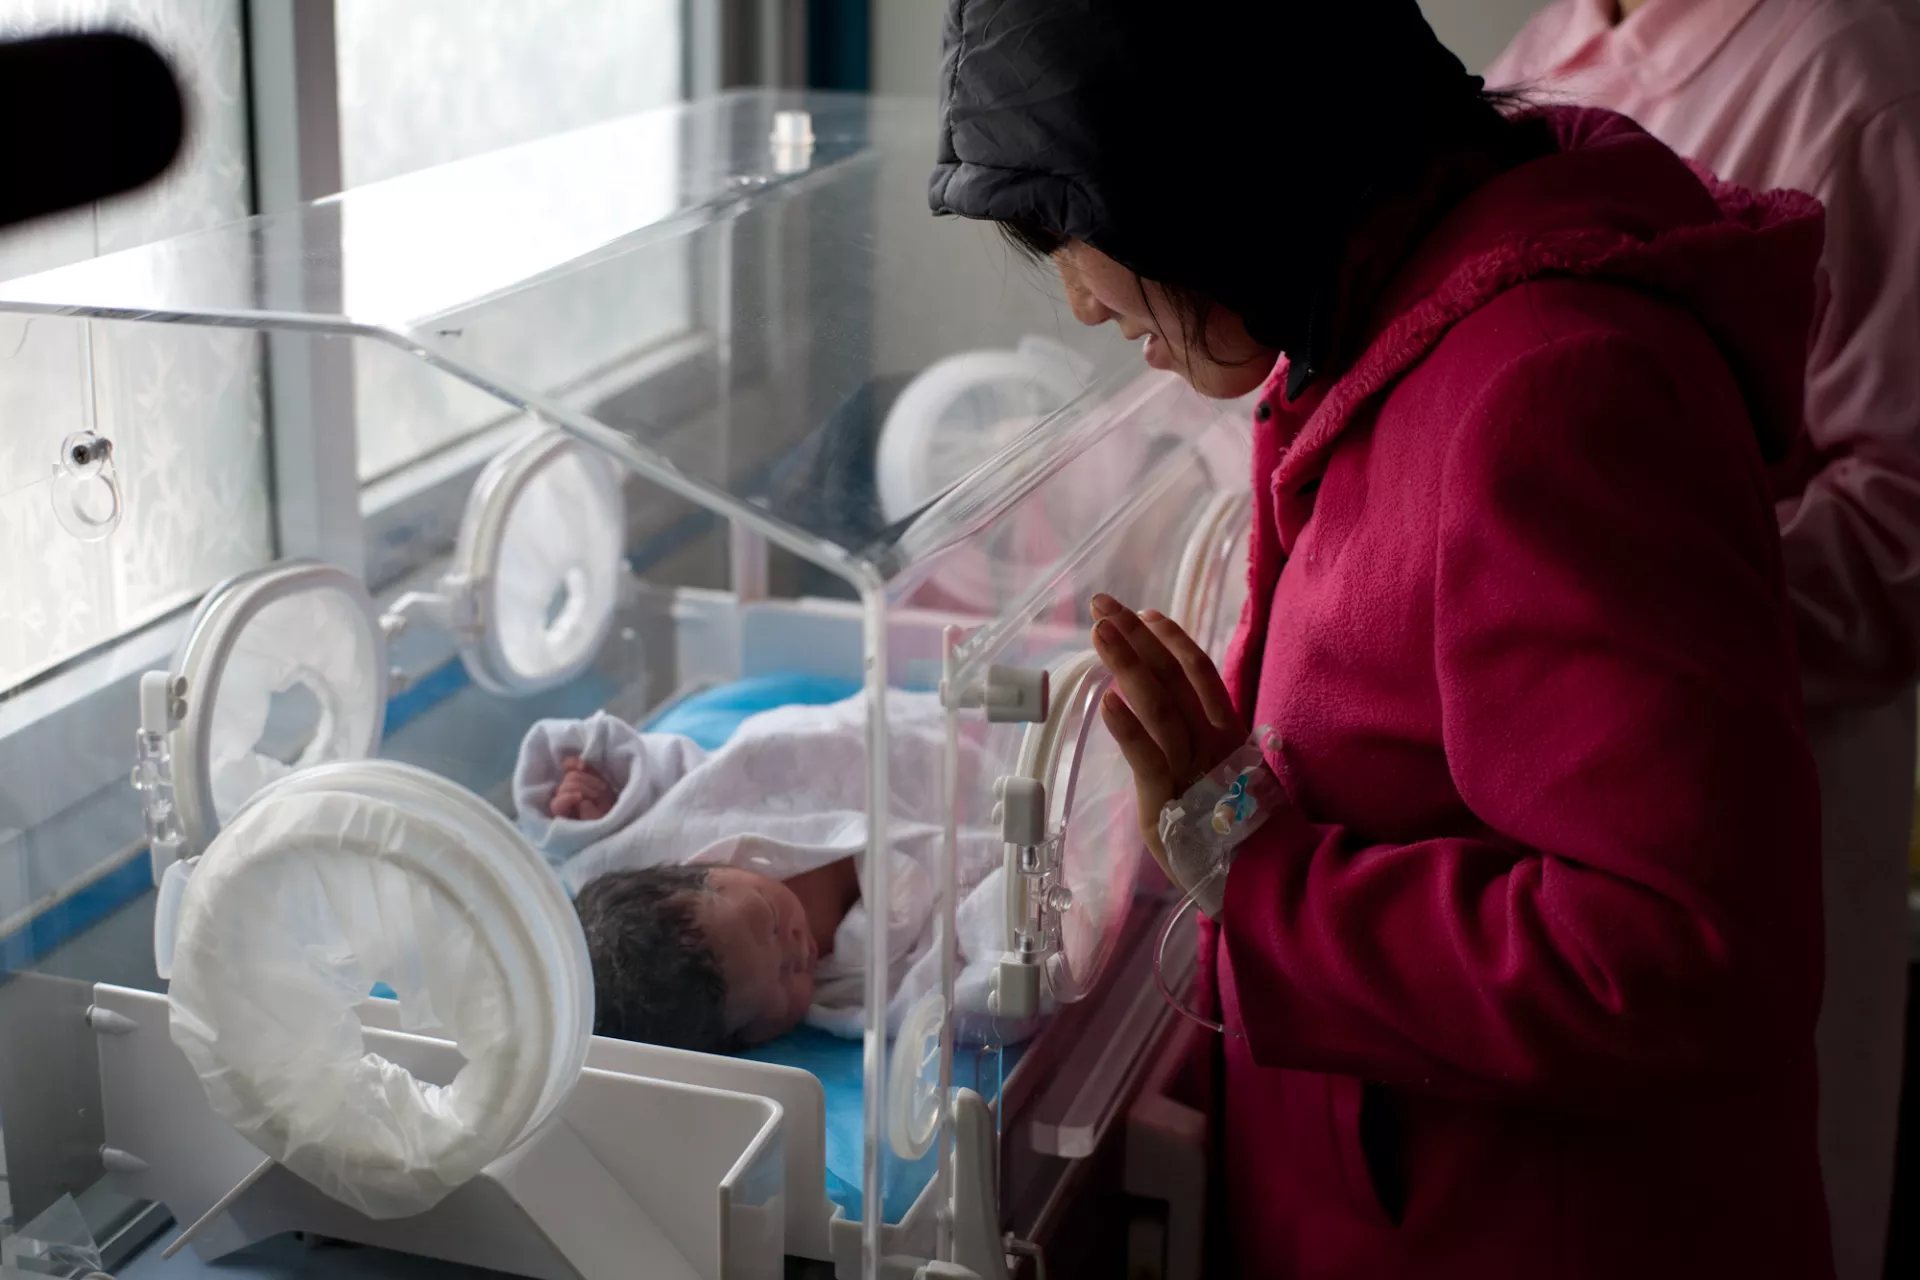 Zhang Chengmei, 26, watches her premature baby resting in an incubator that UNICEF provided to Qingchuan Maternal and Child Care Centre. 